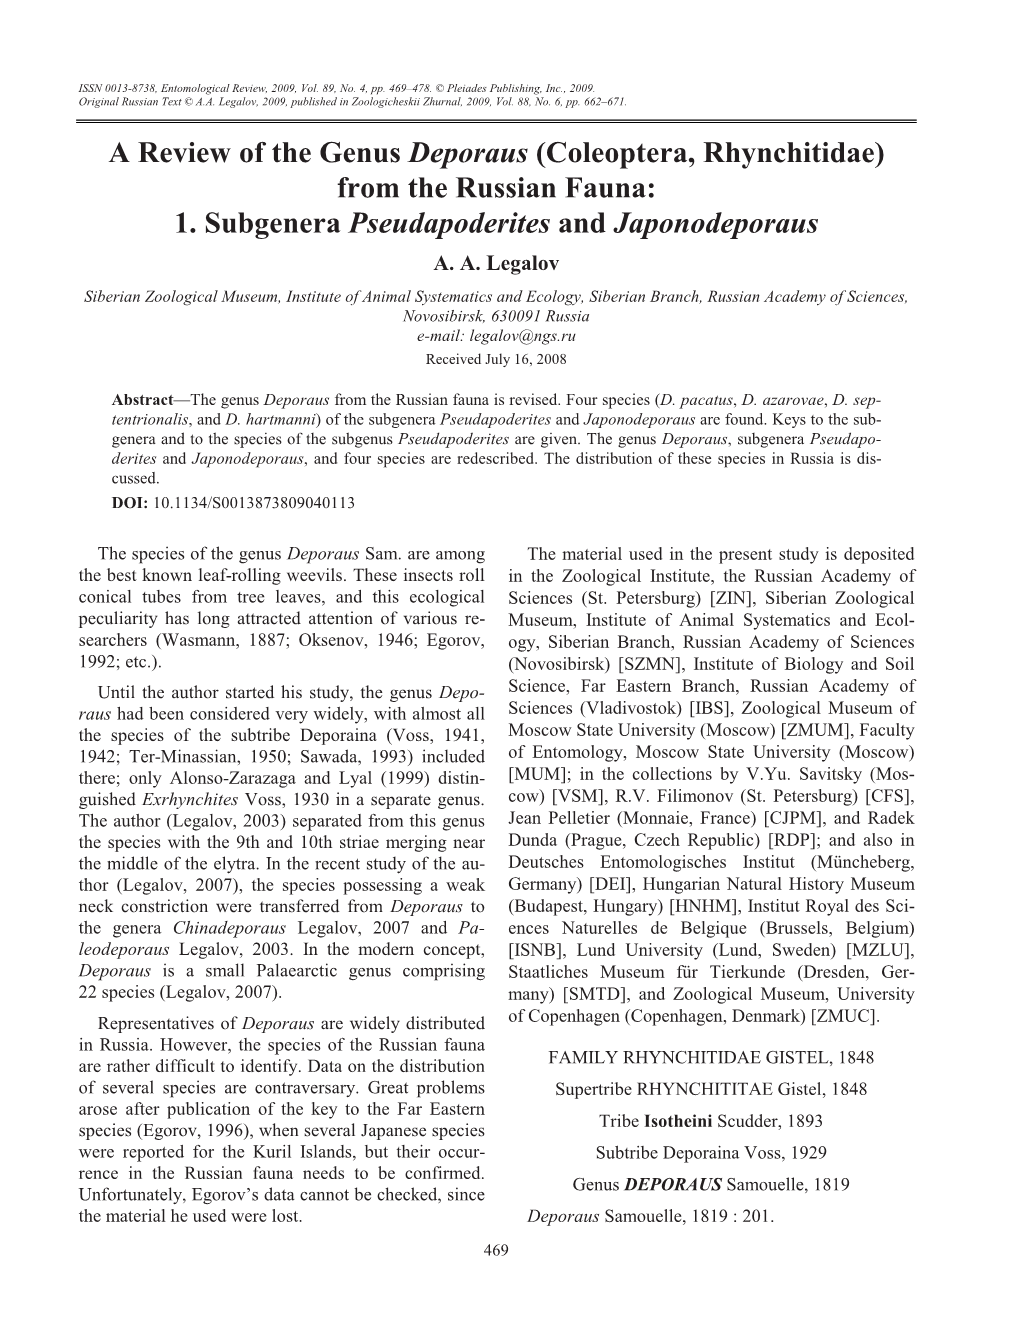 A Review of the Genus Deporaus (Coleoptera, Rhynchitidae) from the Russian Fauna: 1